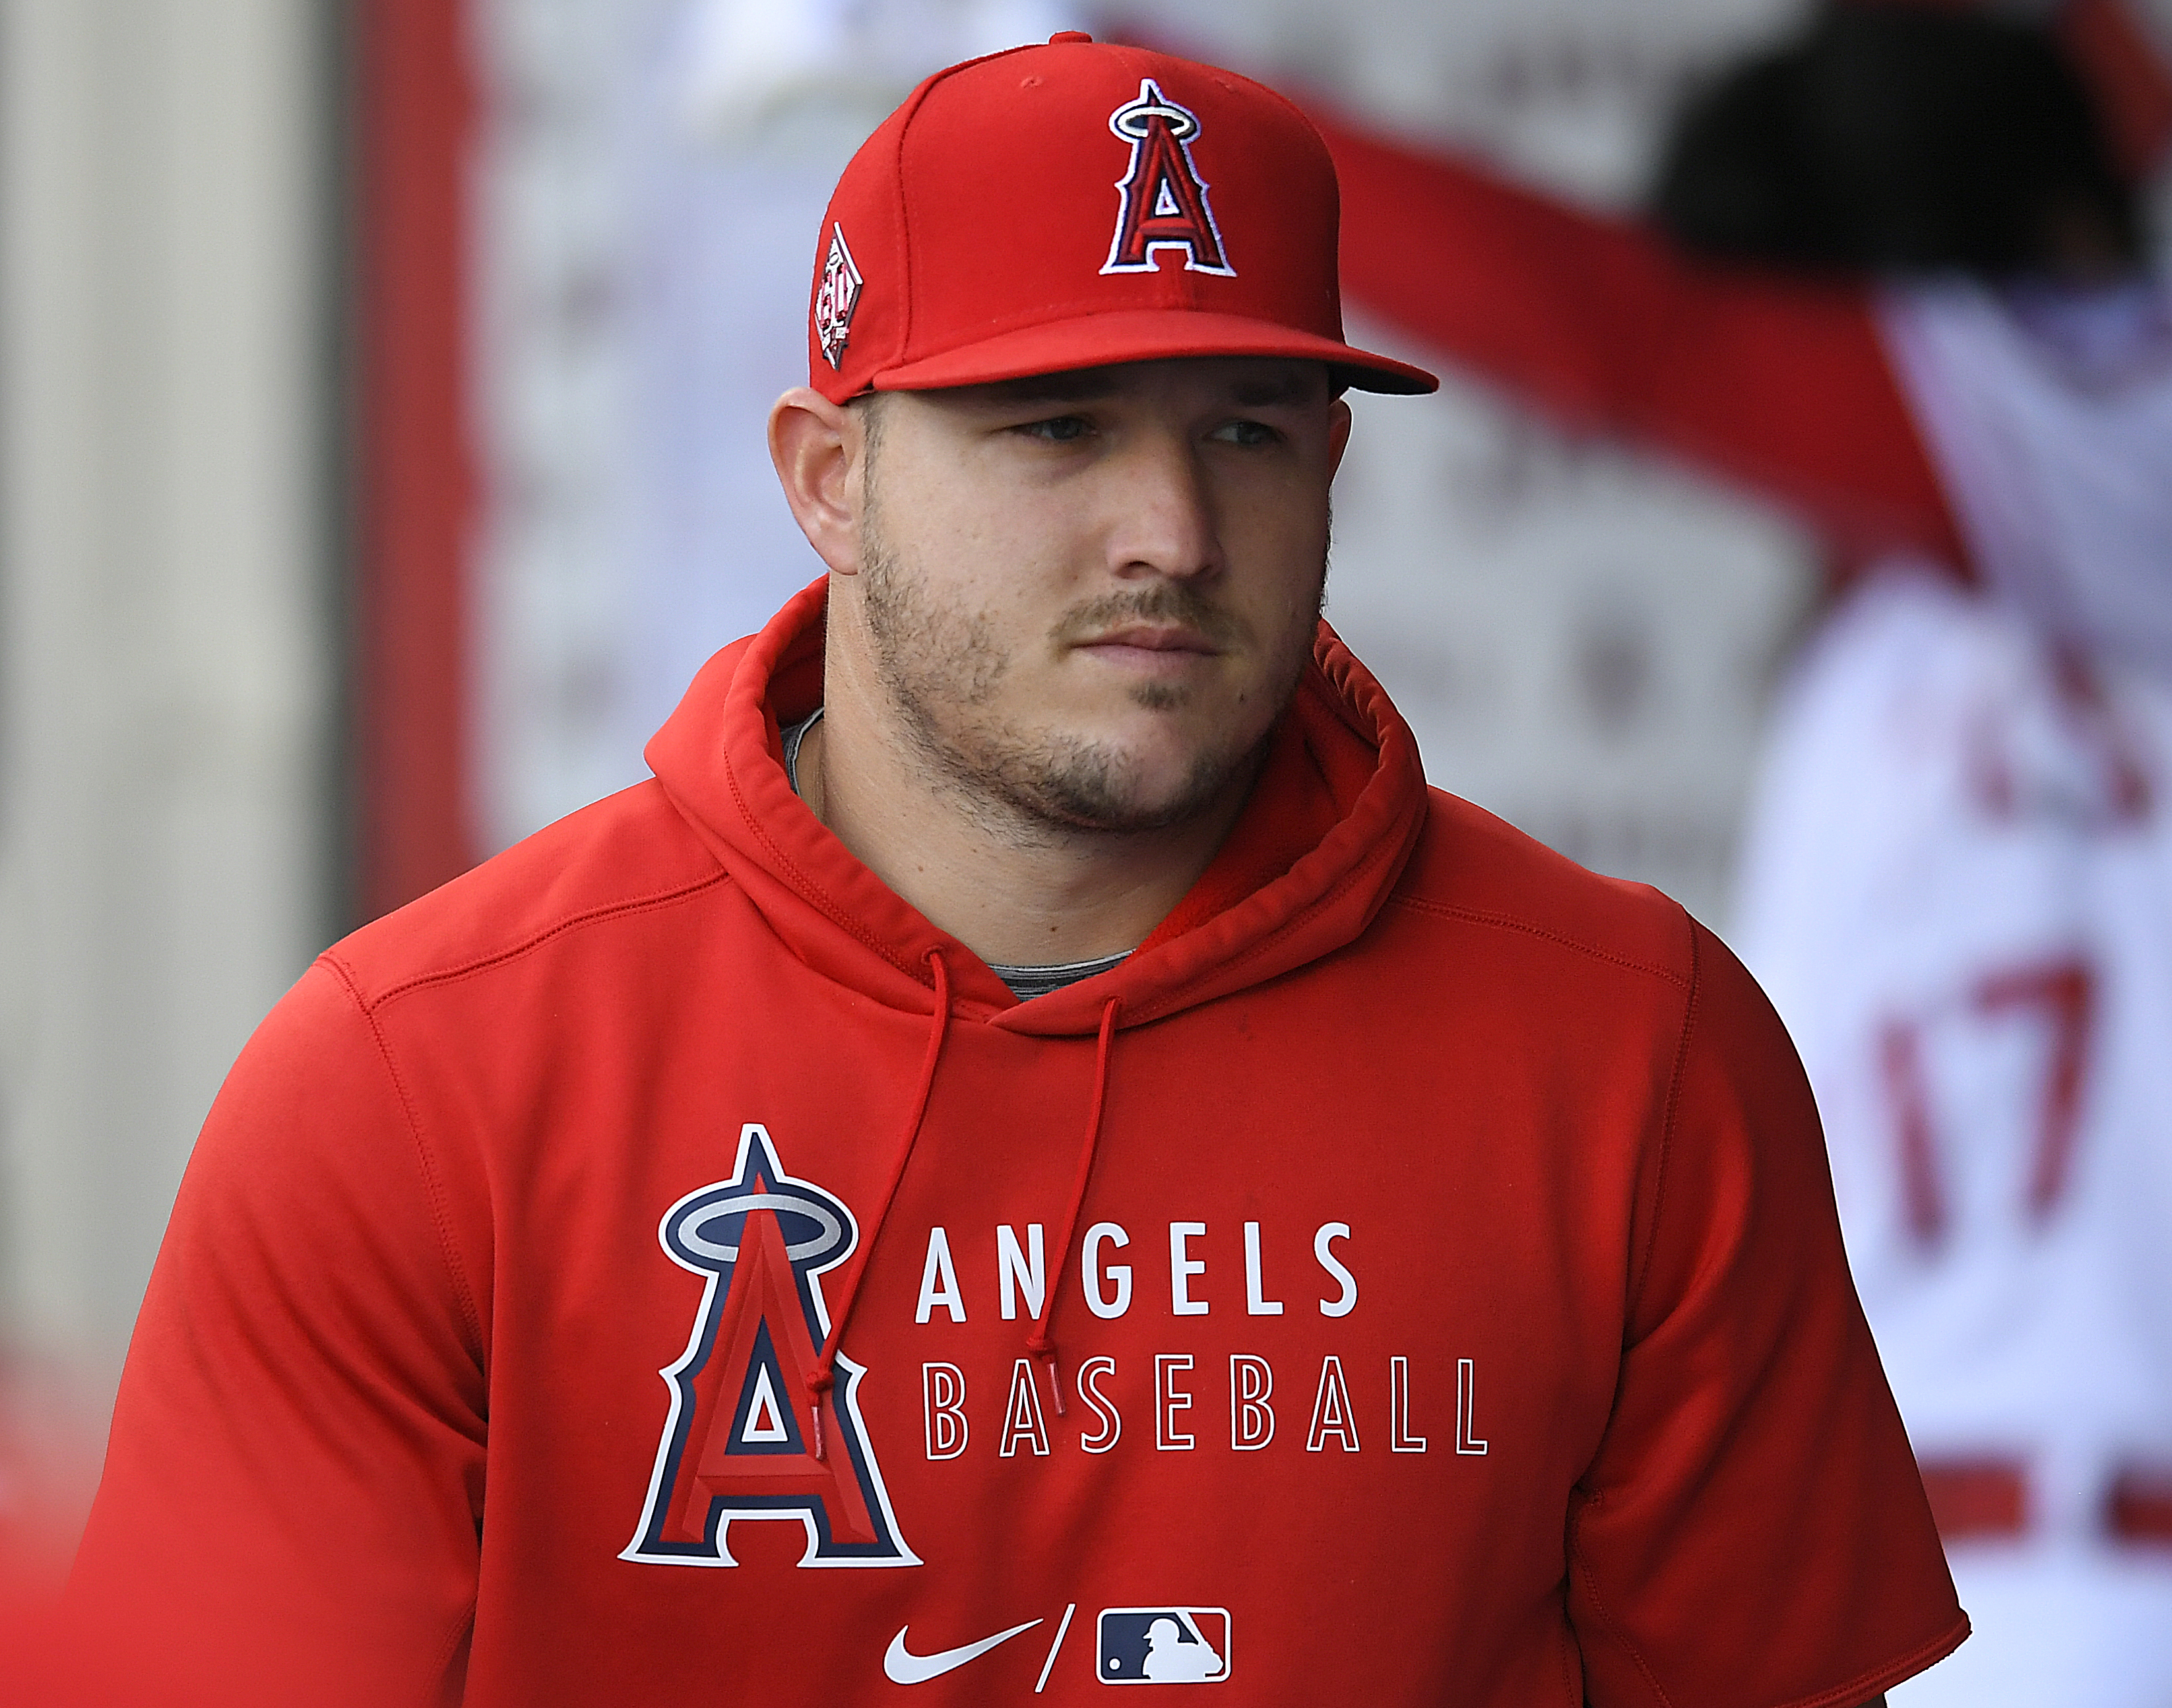 Where can I find this hat? : r/angelsbaseball